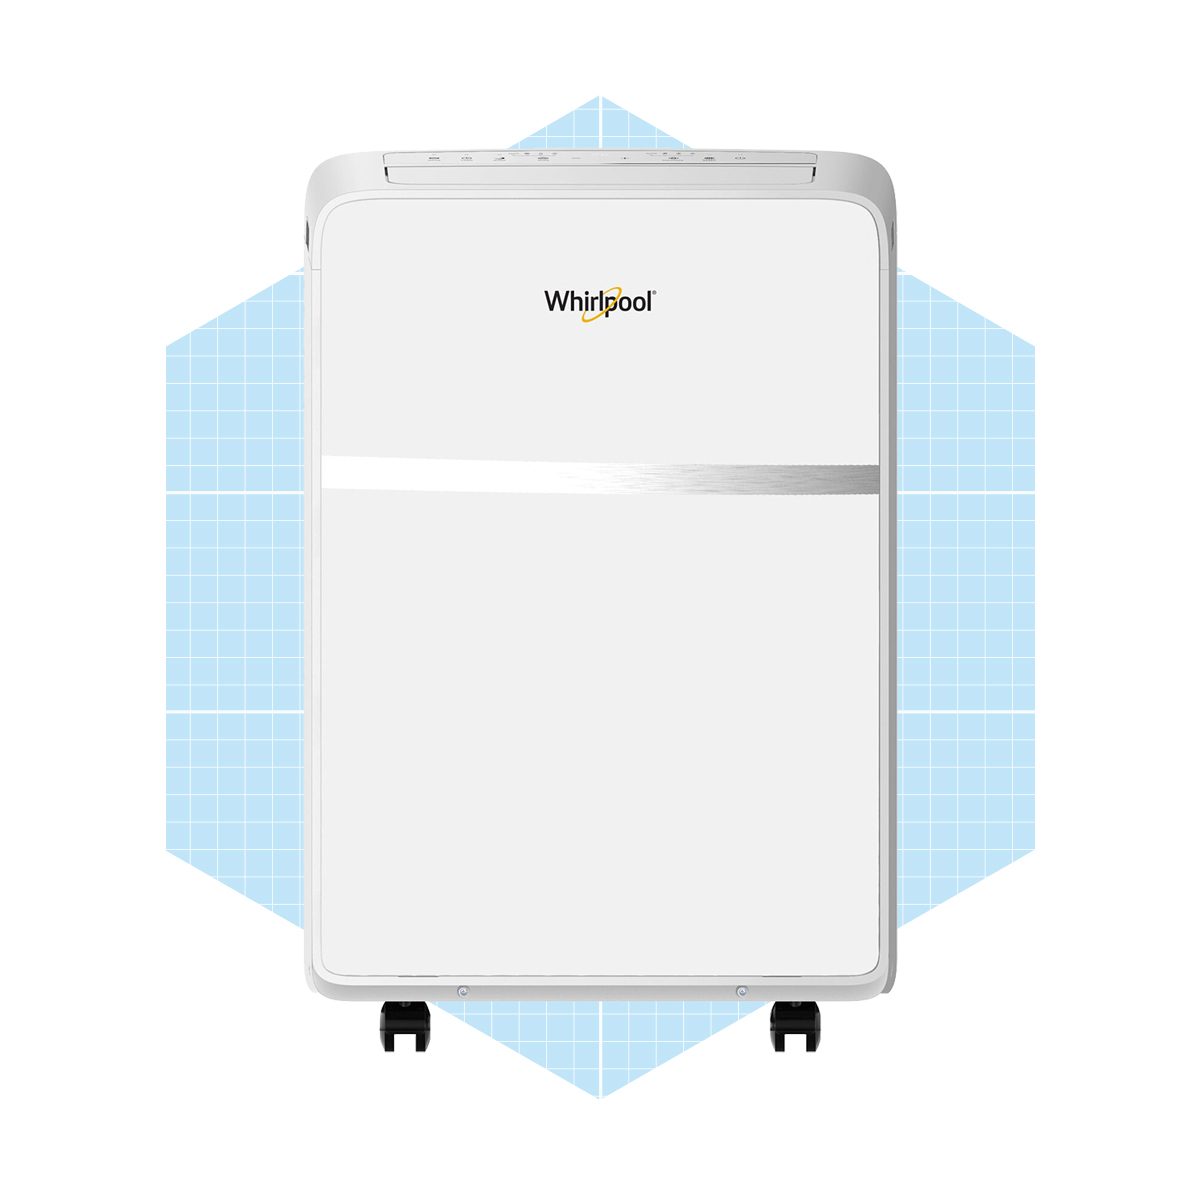 Whirlpool Portable Air Conditioner